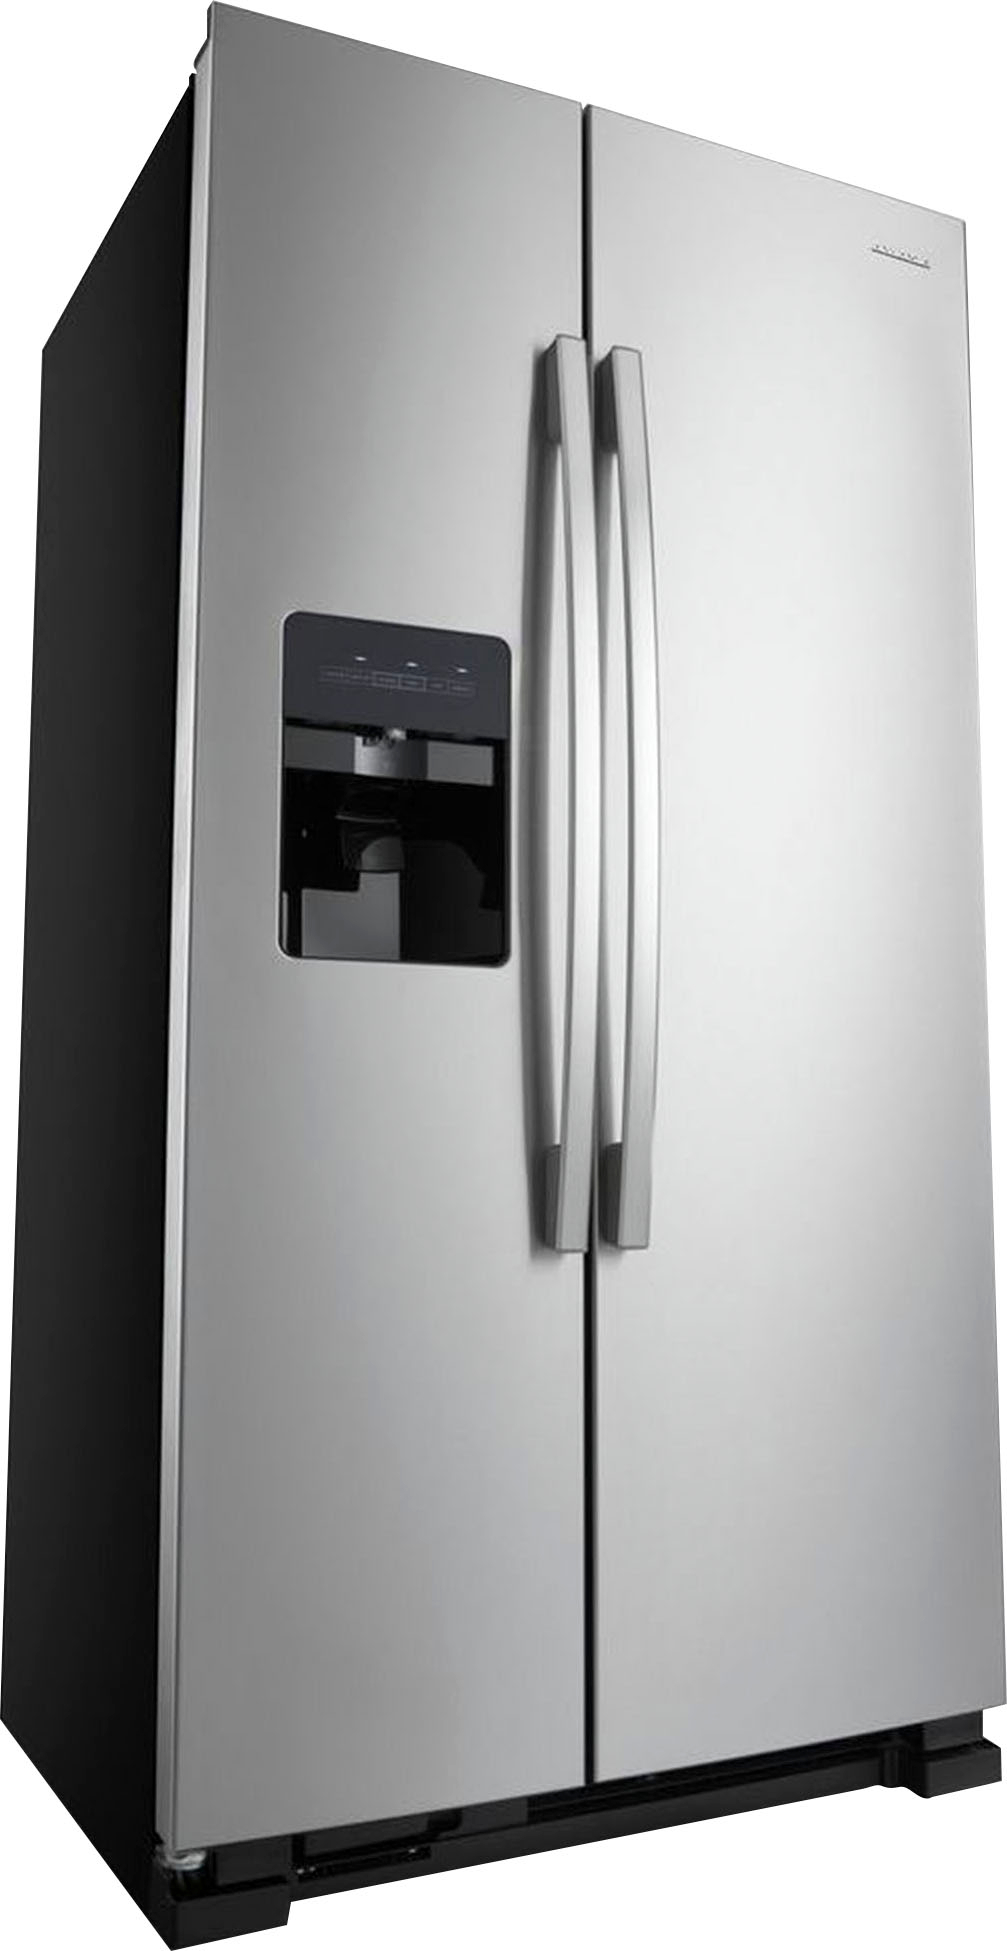 Customer Reviews: Amana 21.4 Cu. Ft. Side-by-Side Refrigerator ...